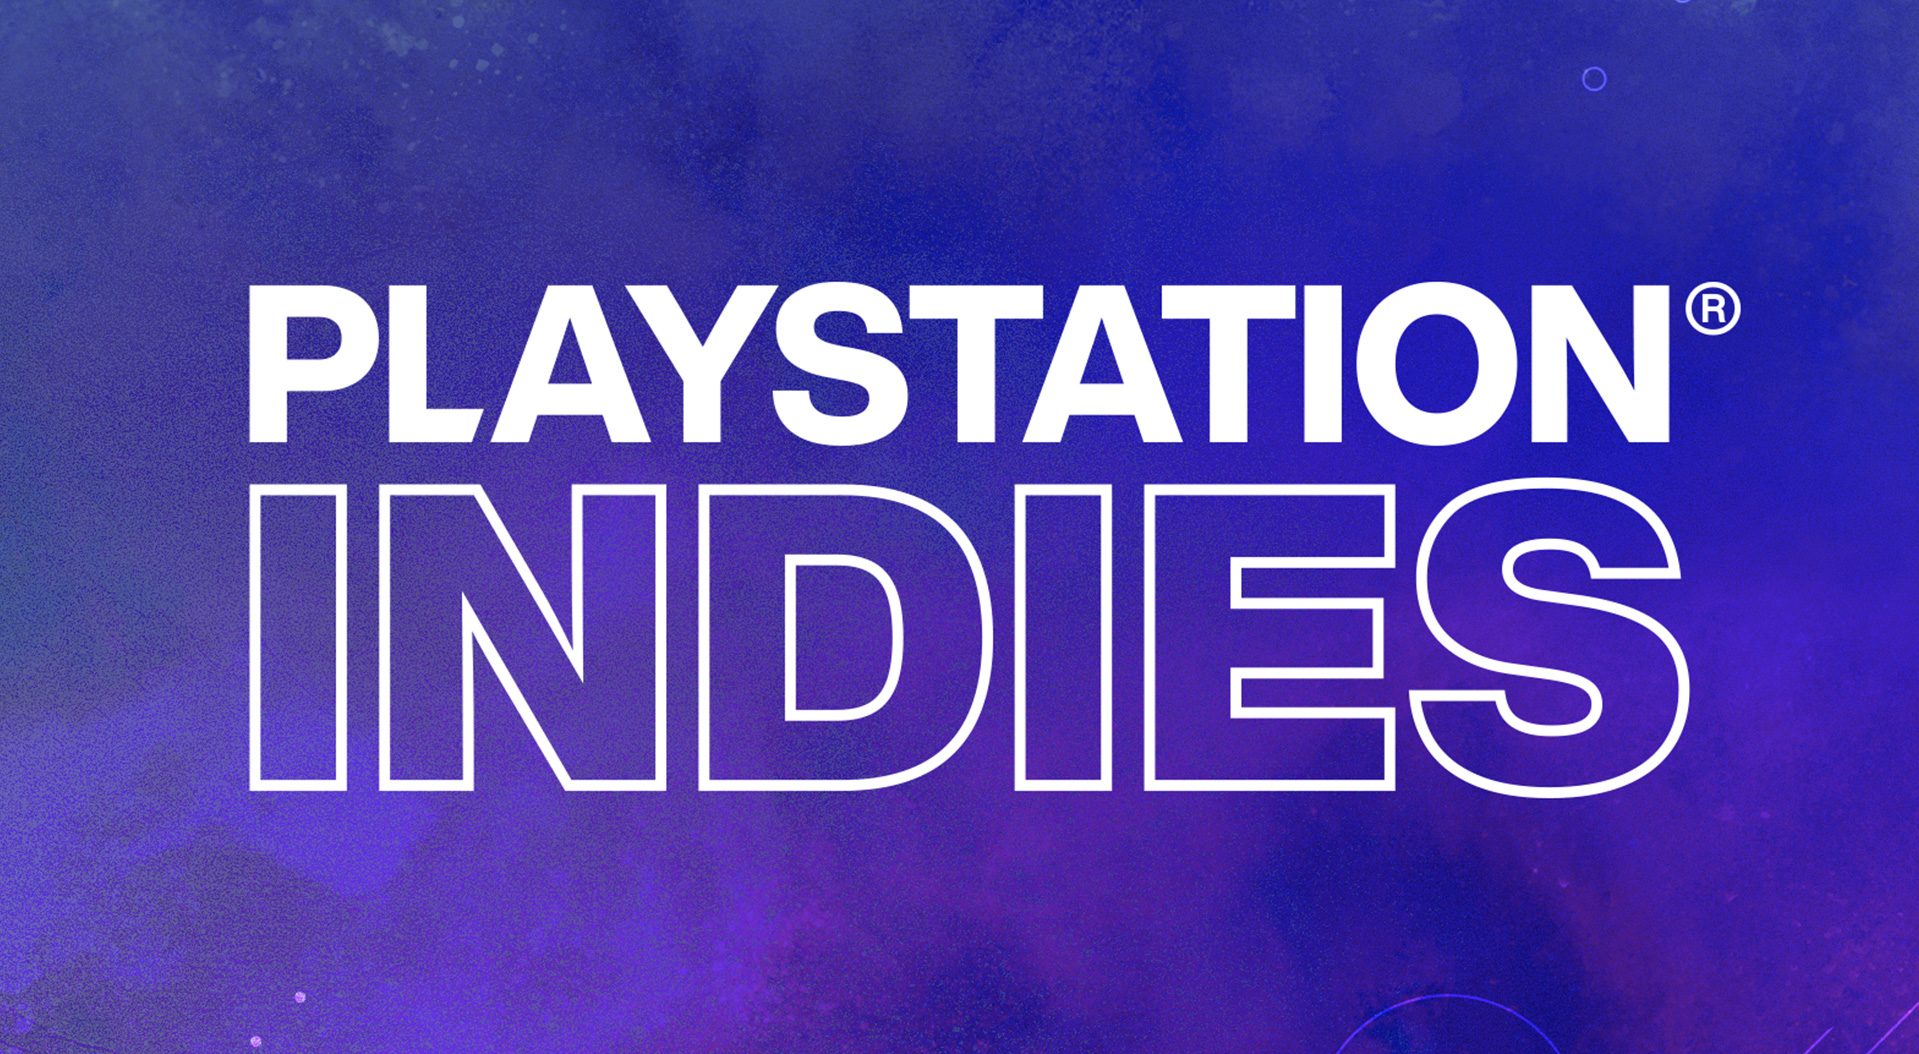 PlayStation Indies logo on purple and blue background